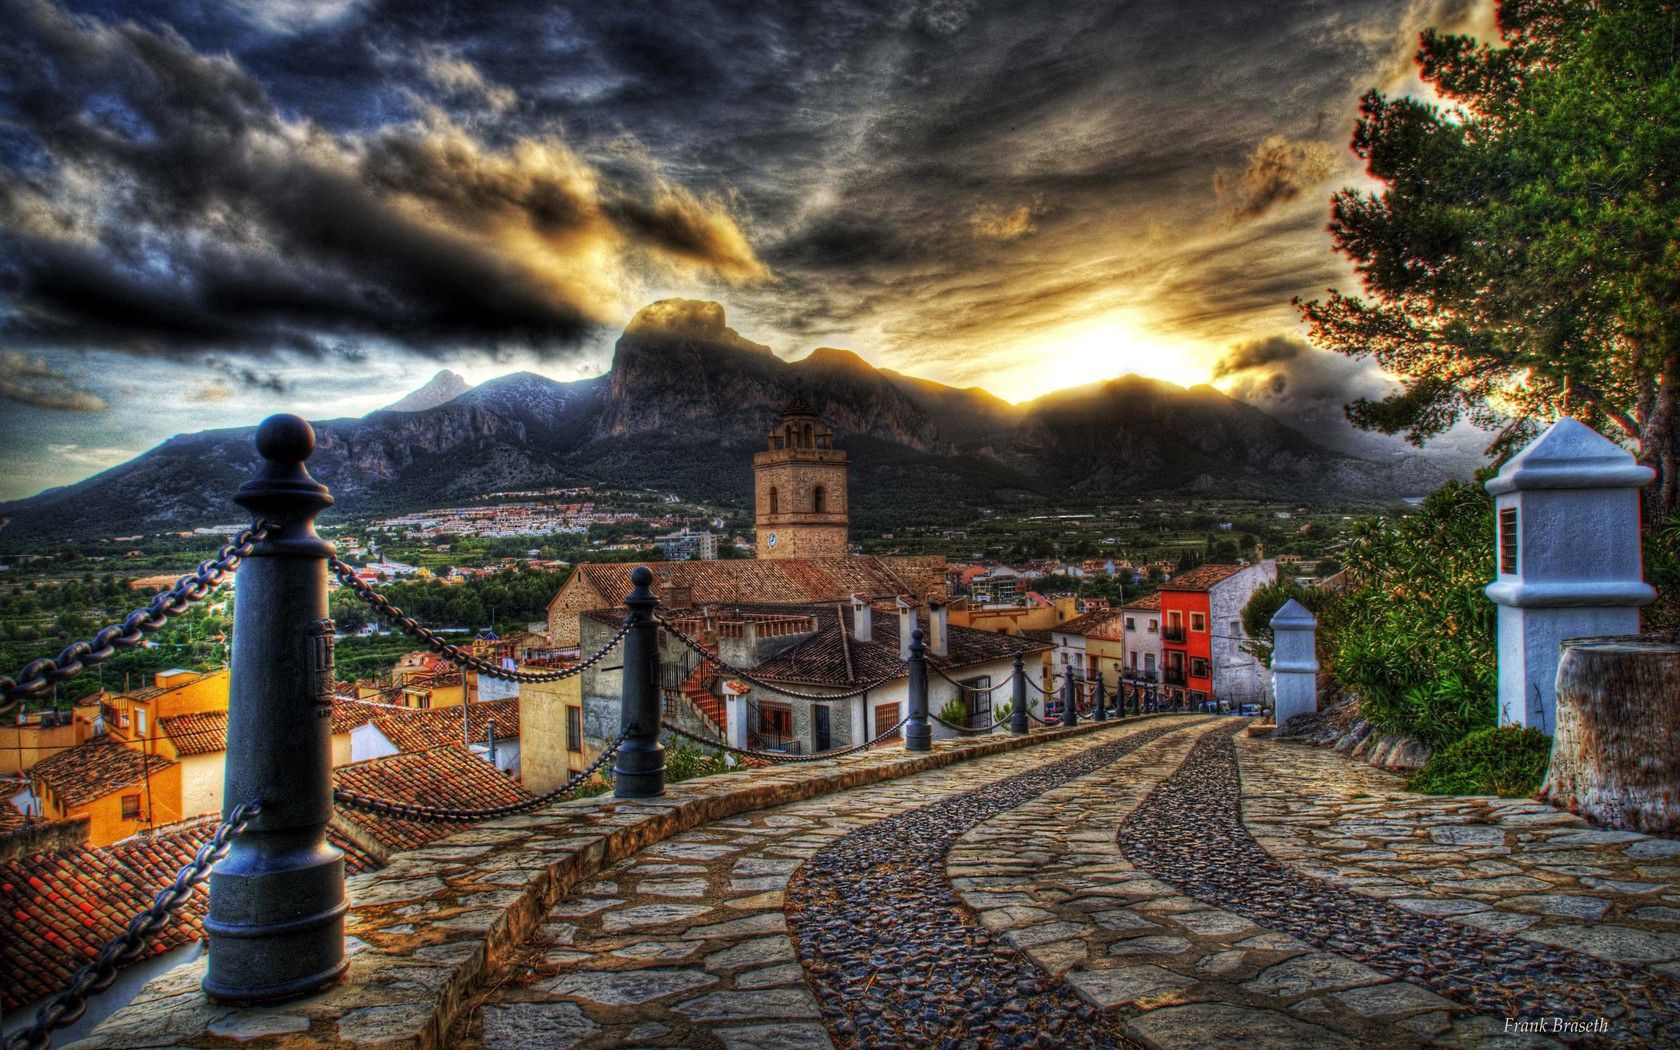 streets, sky, cities, flowers, houses, sunset, mountains, architecture, clouds, road, beautiful, old, colorful, hdr